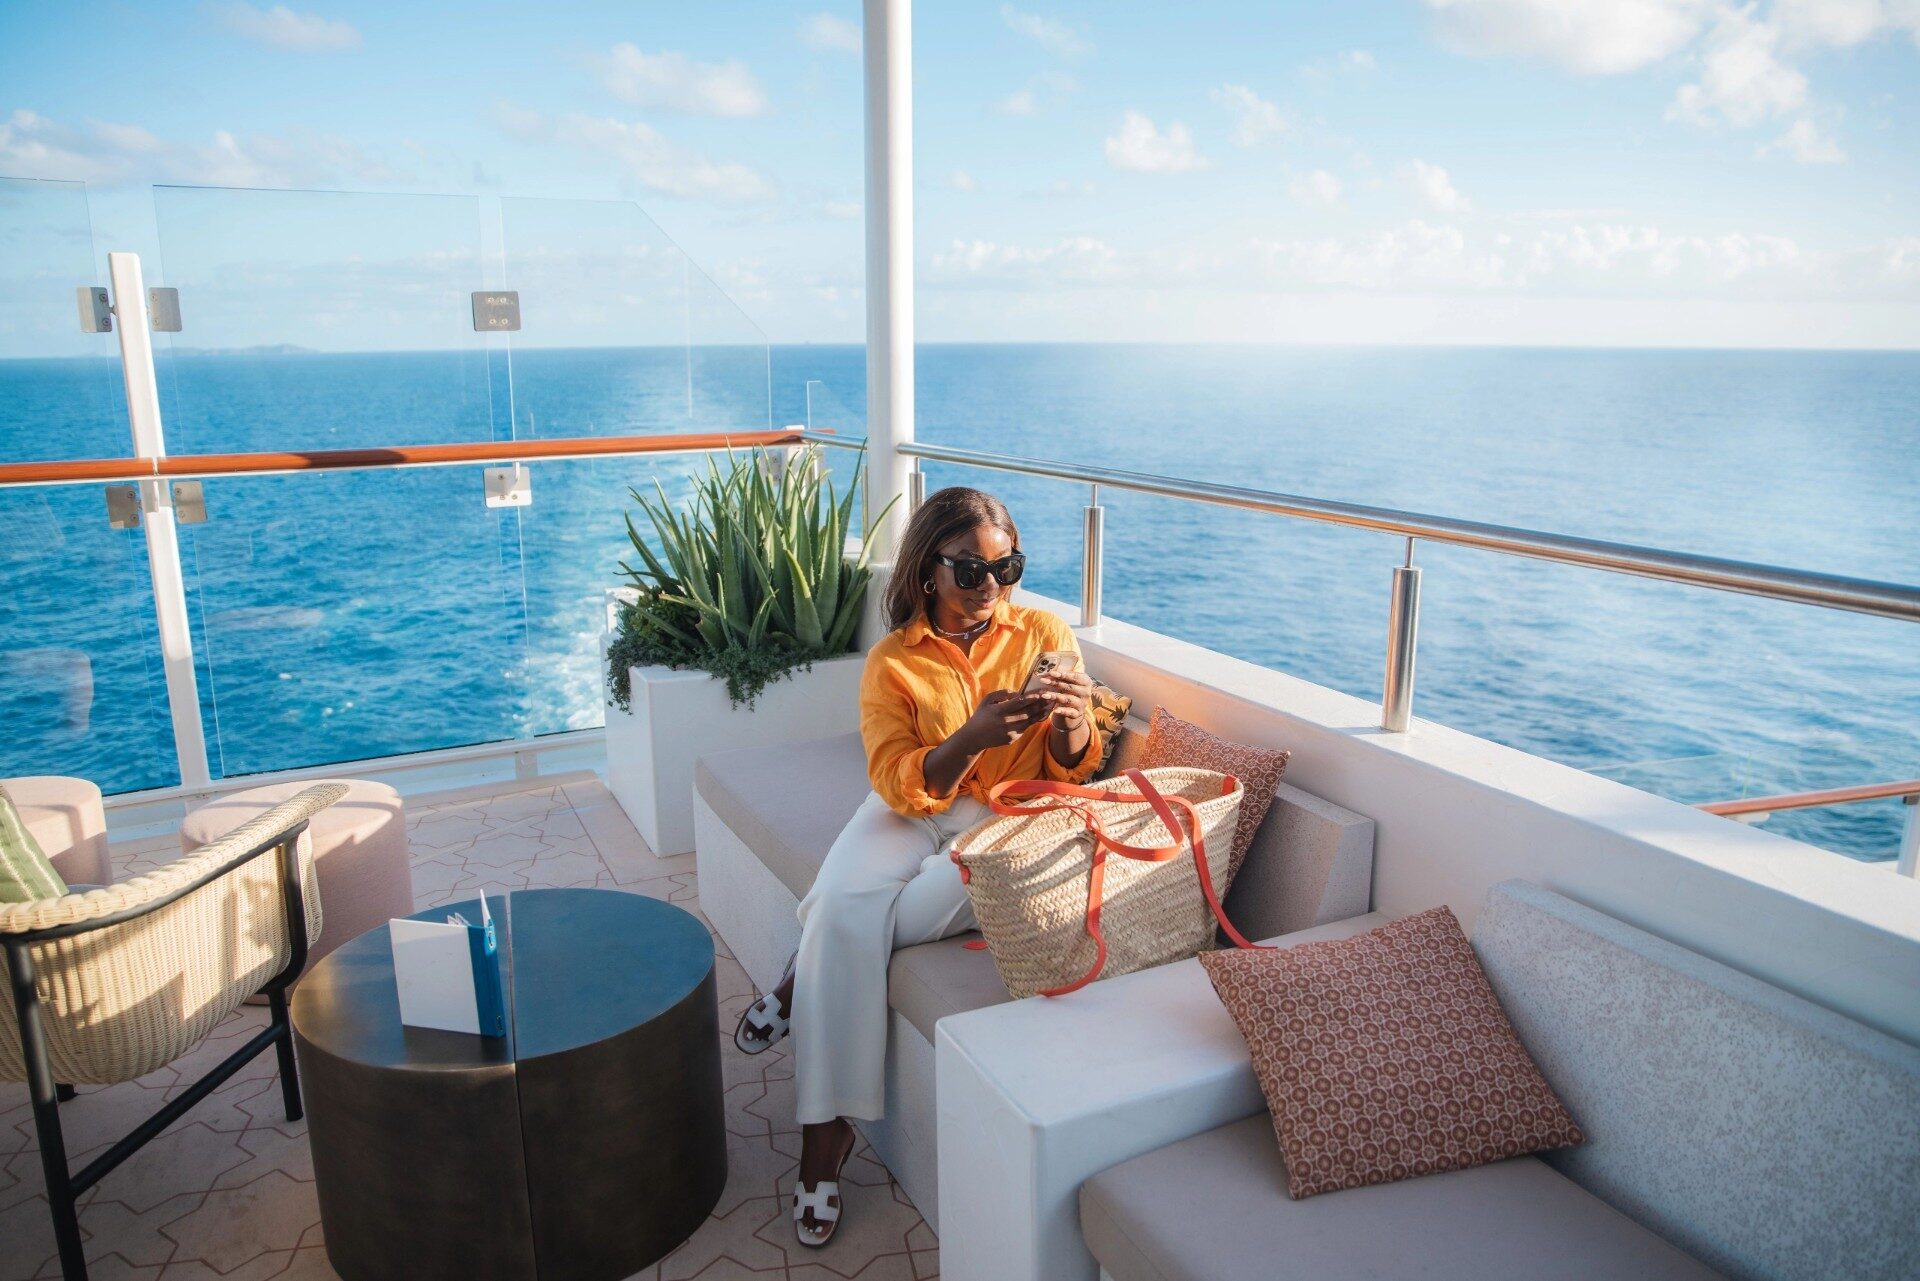 A Cruise Journalist Shares Her Best Cruise Packing Tips Celebrity Cruises image